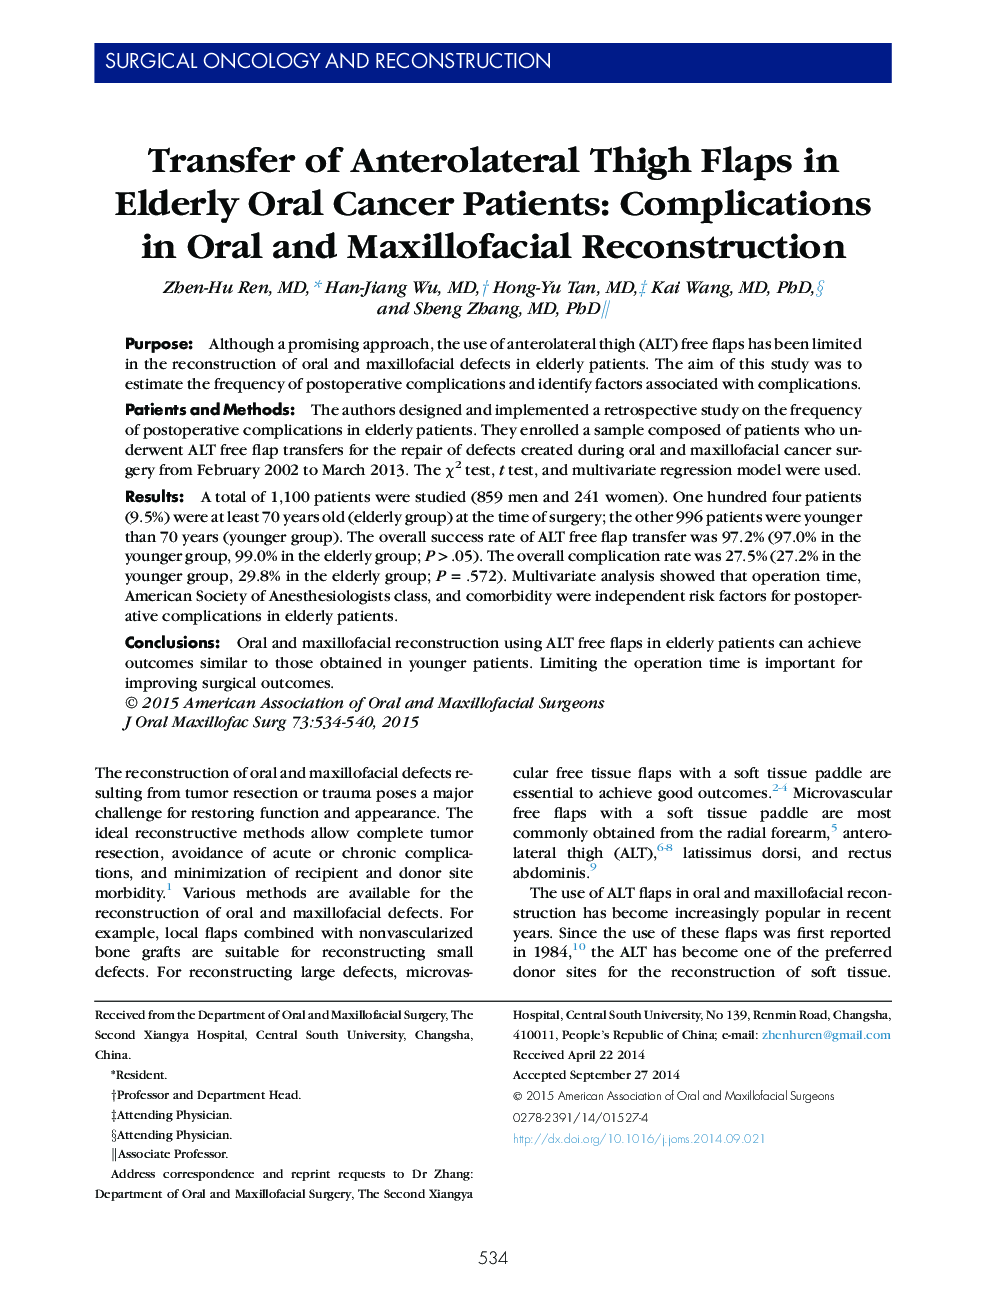 Transfer of Anterolateral Thigh Flaps in Elderly Oral Cancer Patients: Complications in Oral and Maxillofacial Reconstruction